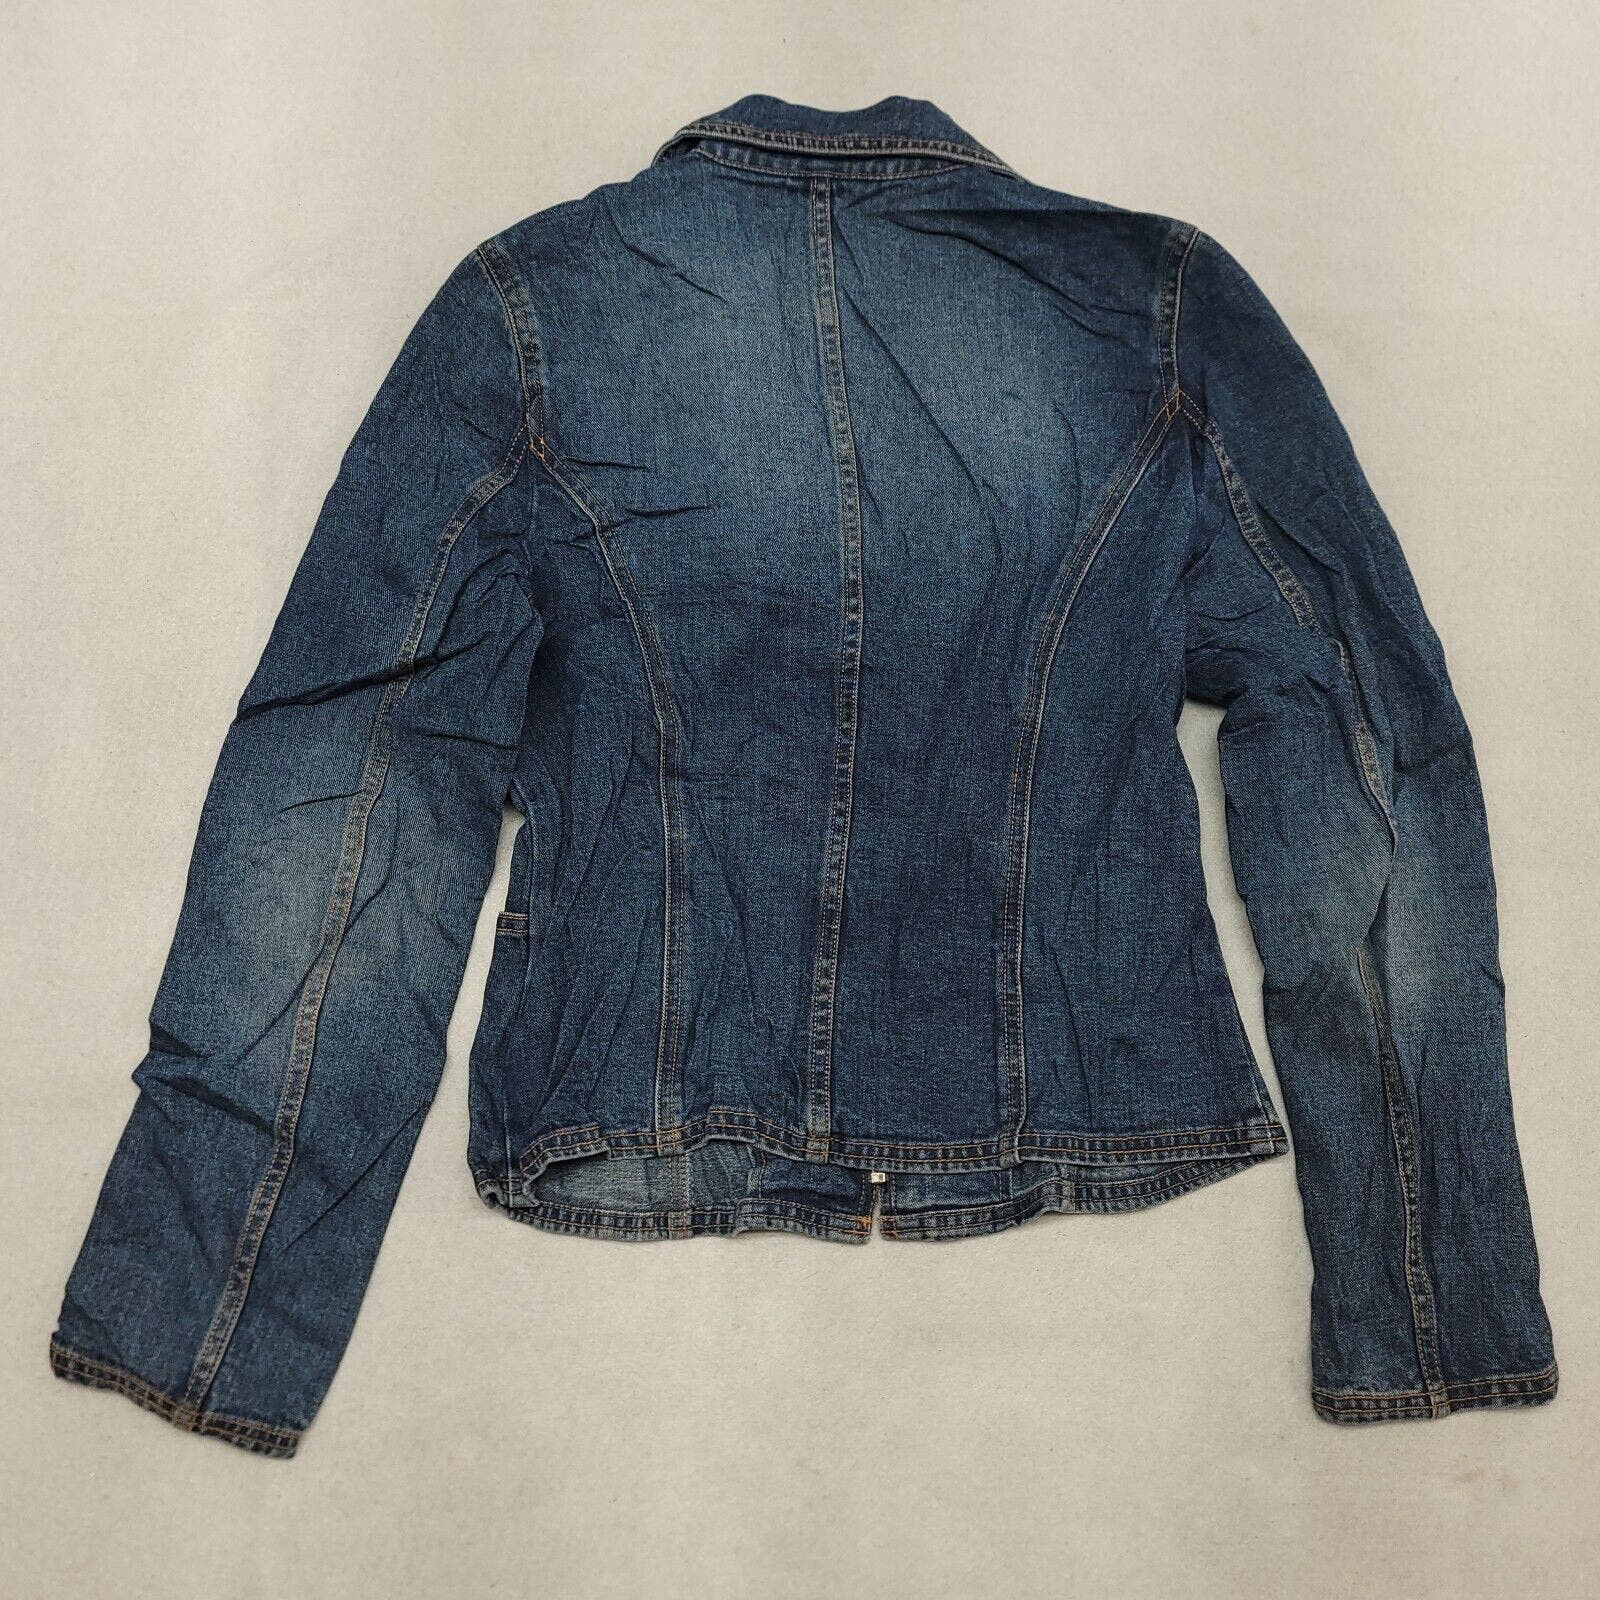 Willi Smith Willi Smith Button Up Denim Jean Jacket Womens Size M Blue Size M / US 6-8 / IT 42-44 - 11 Preview